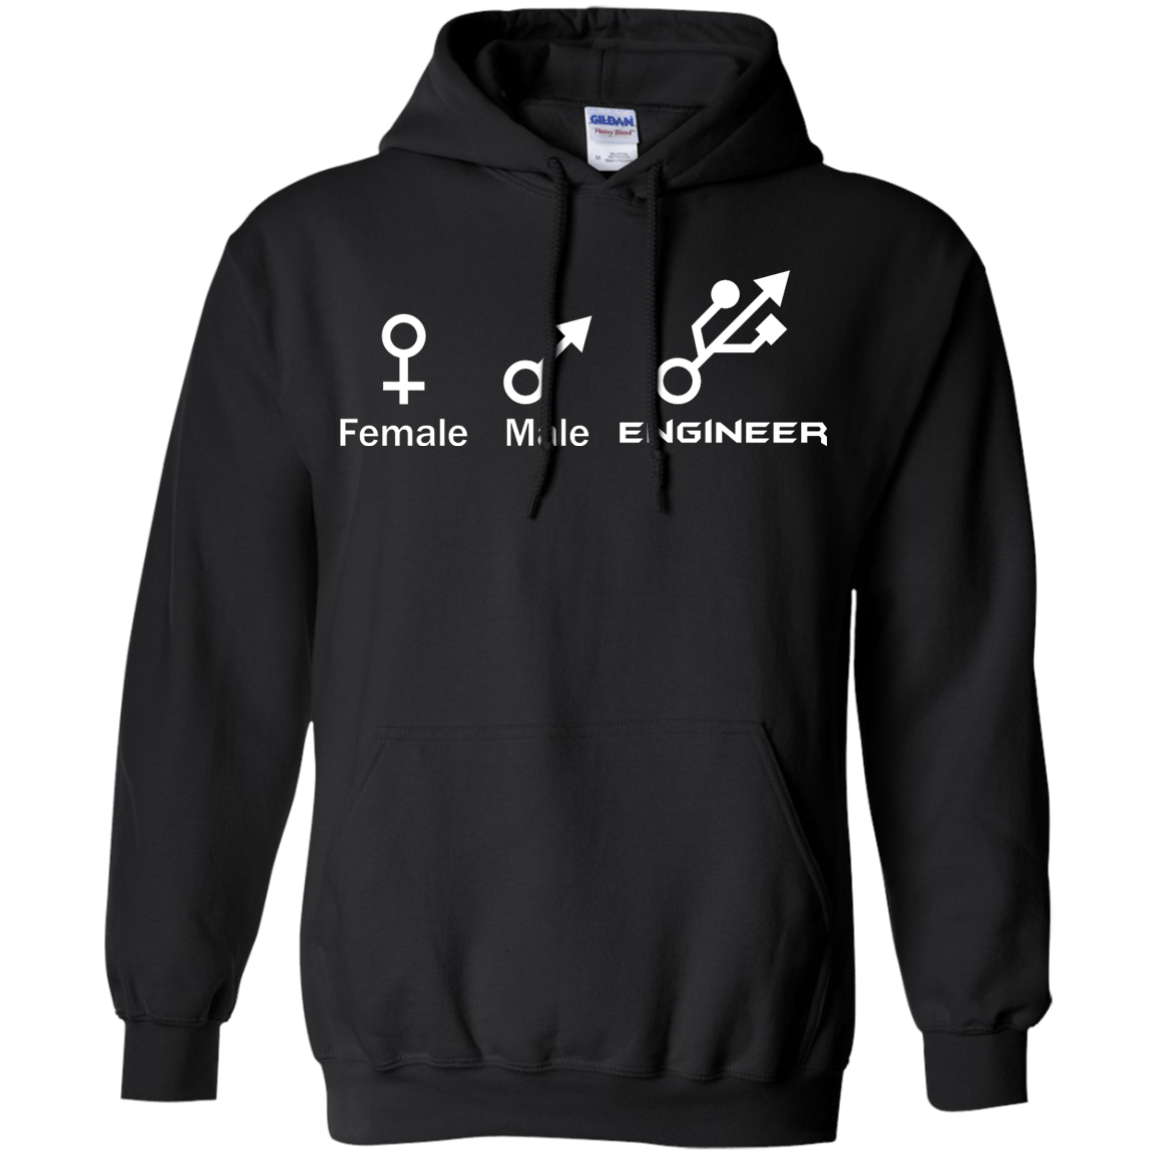 Female, Male, Engineer Symbols - Engineering Outfitters